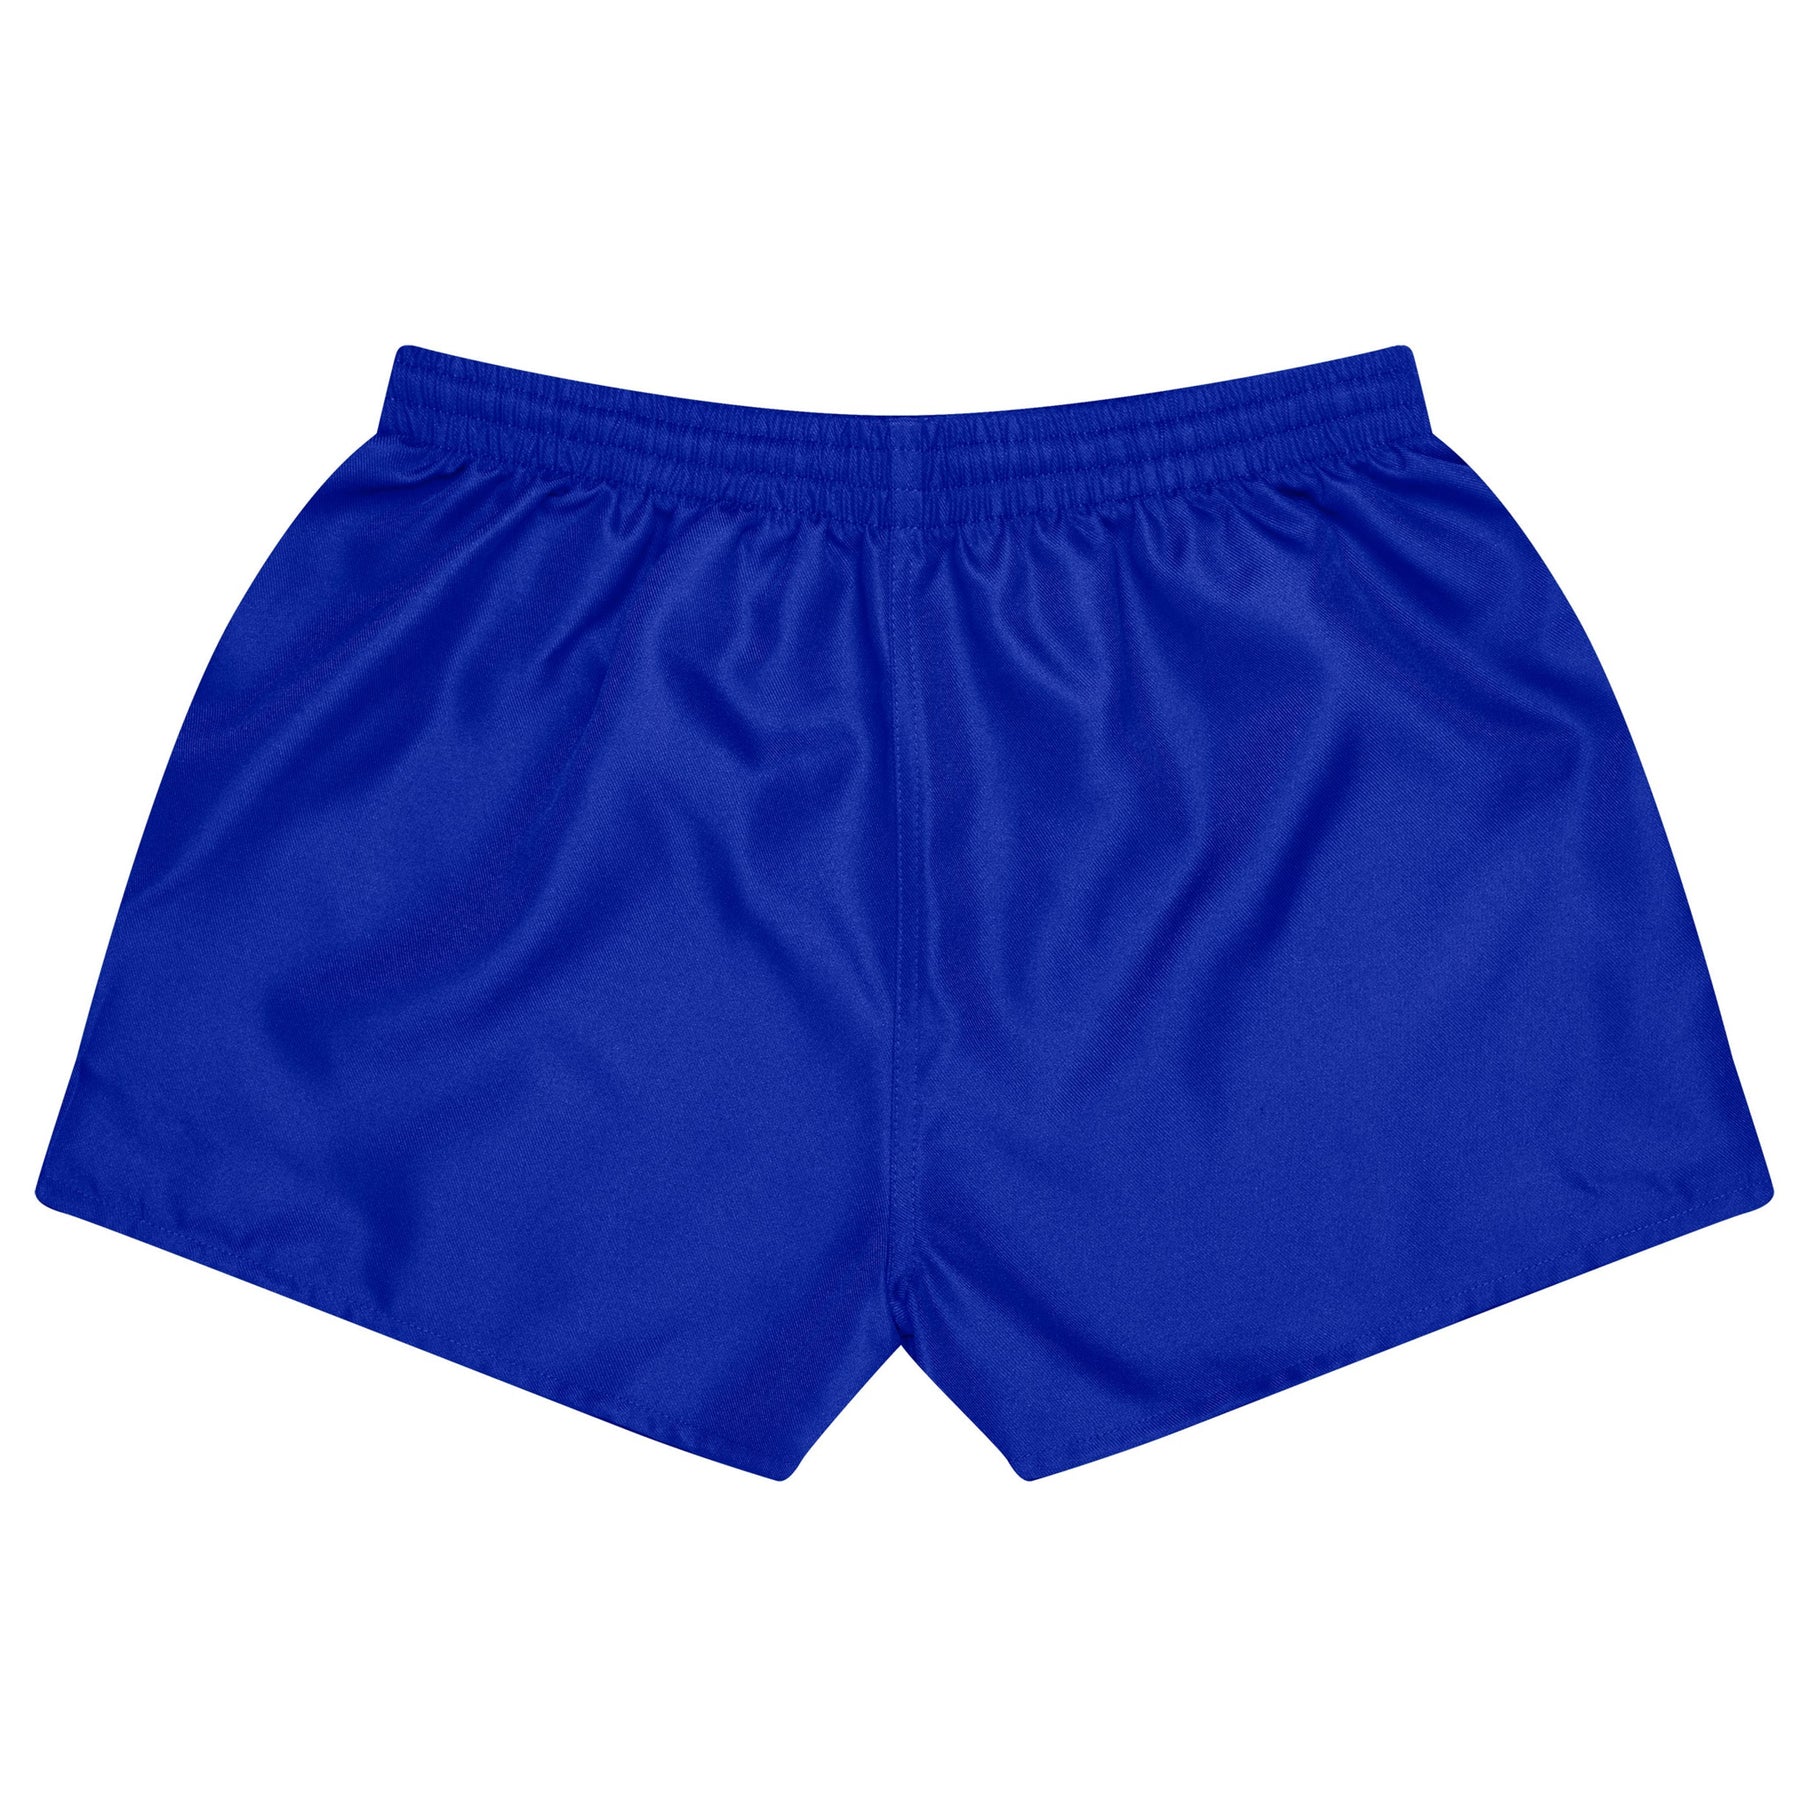 aussie pacific rugby kids shorts in royal